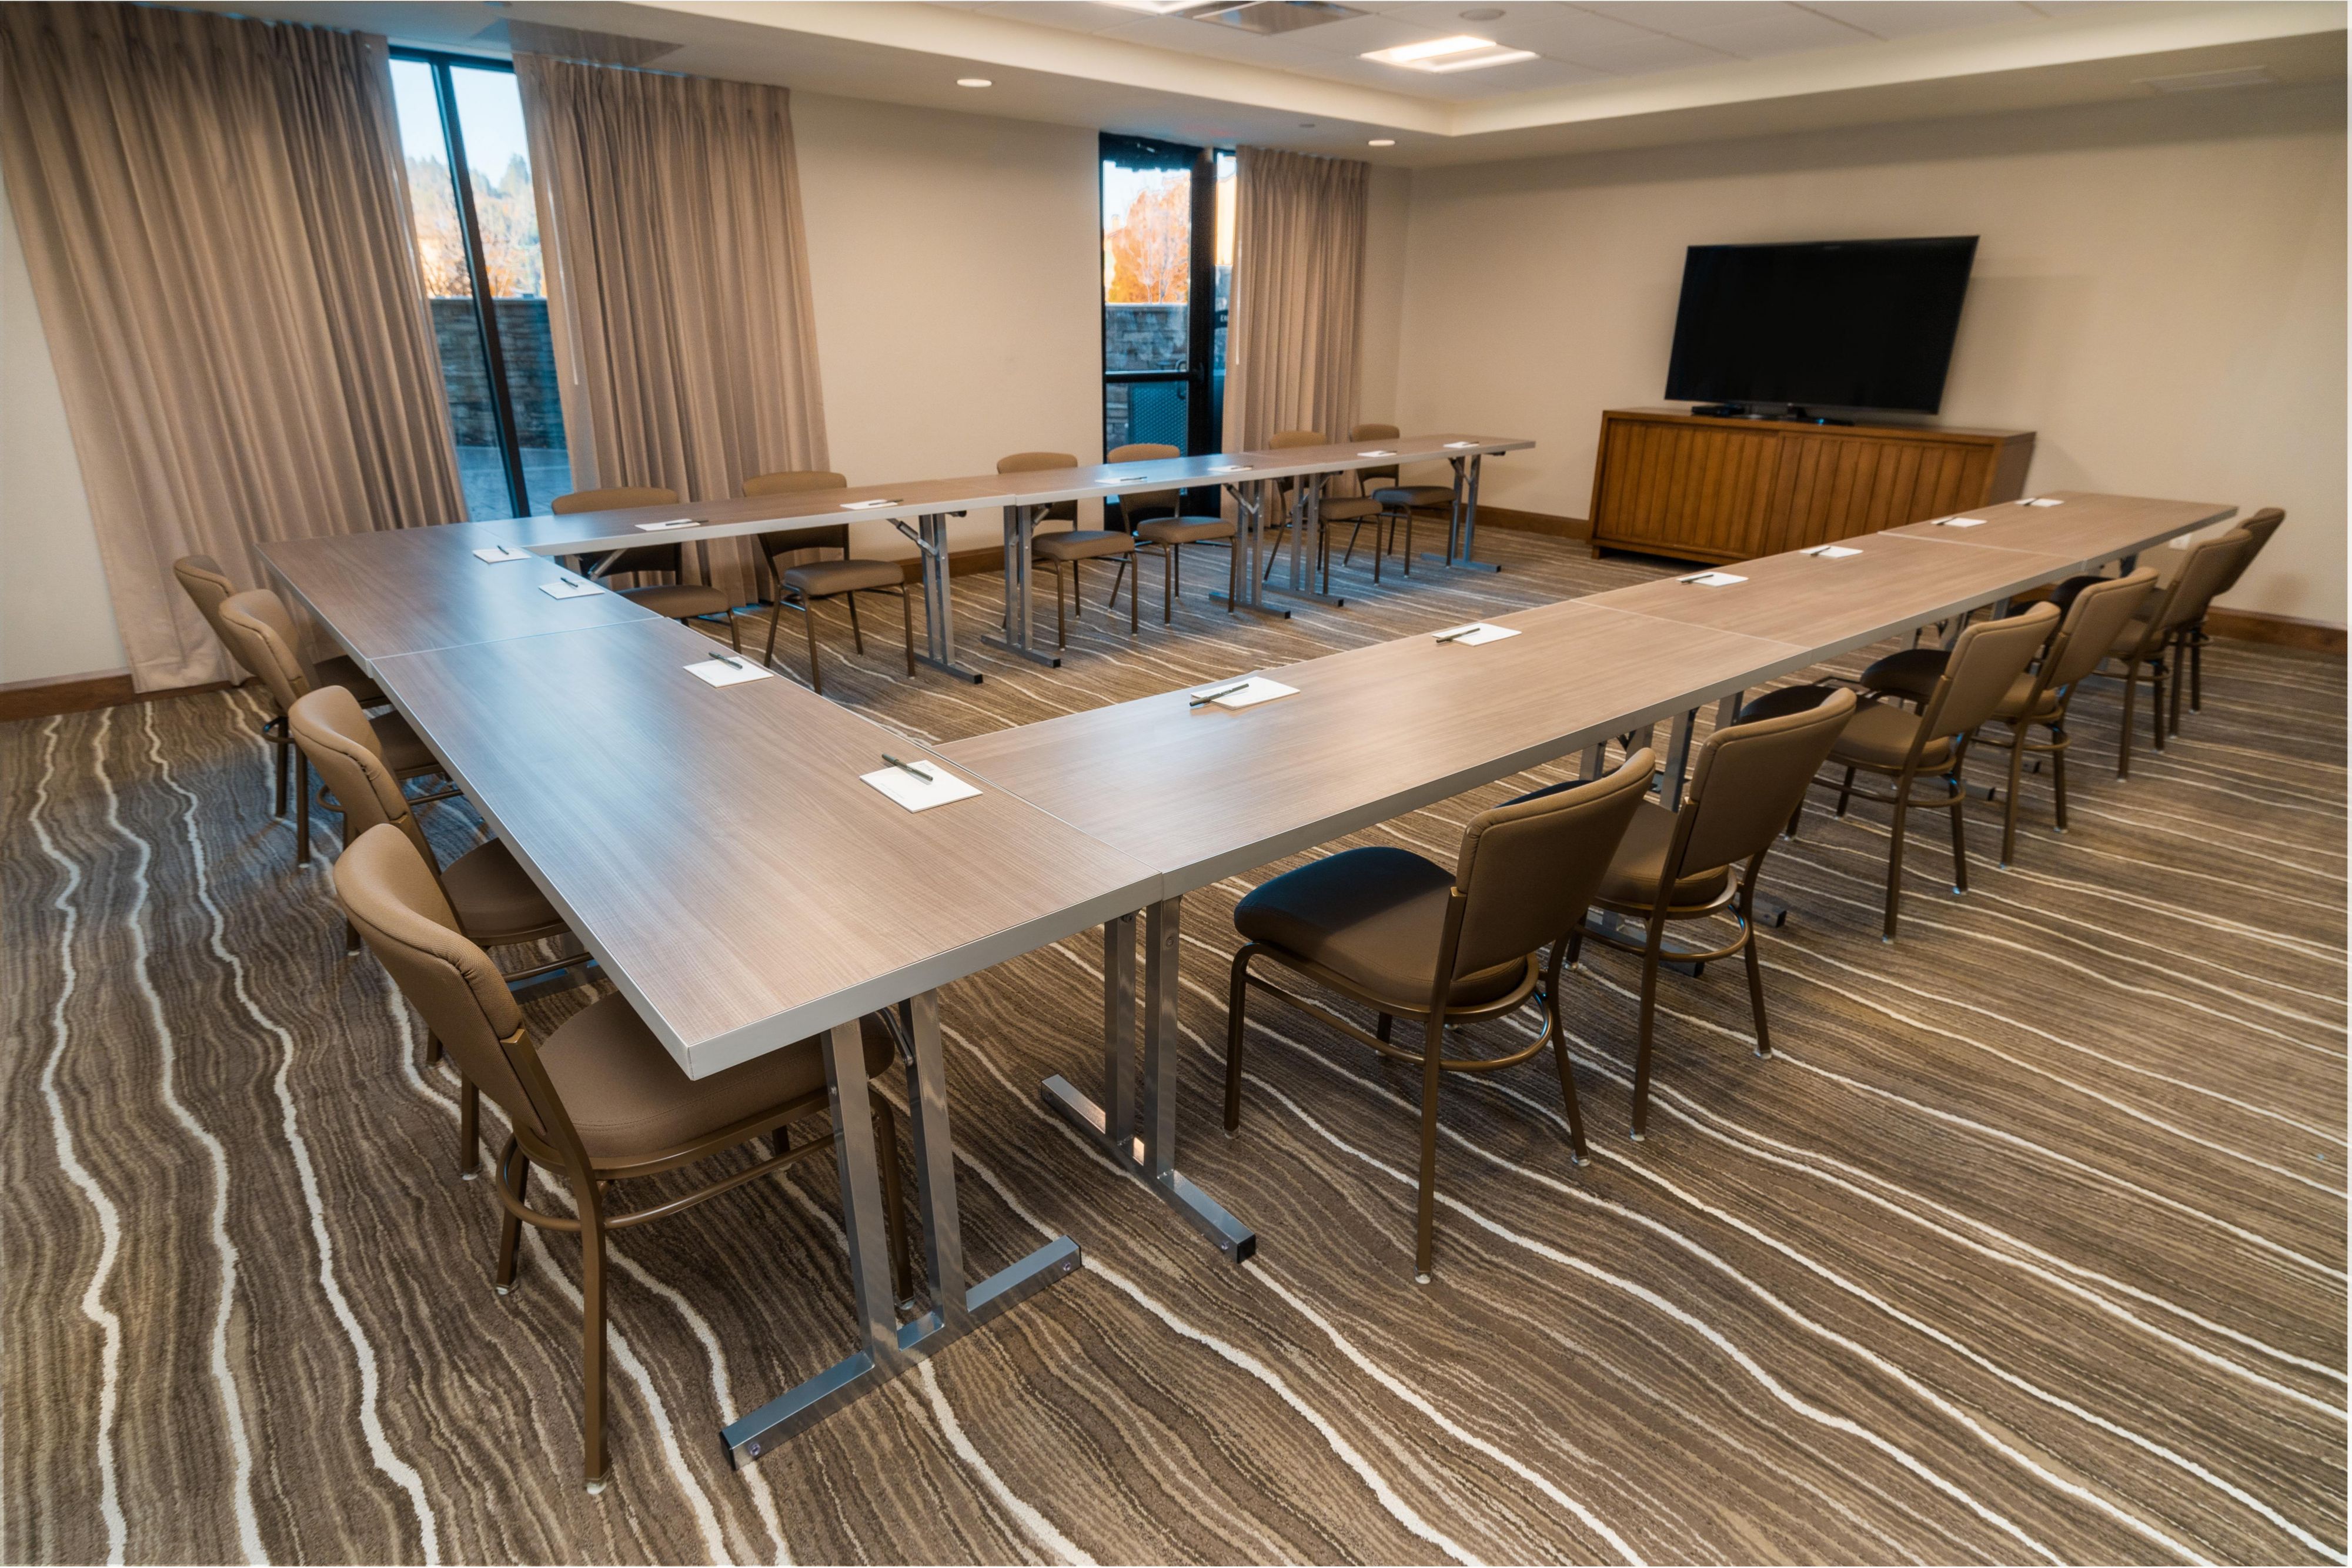 With over 600 square feet of flexible, stylish meeting space, we can host any kind of board meeting, social function, seminar, or training with personalized attention. Please contact us to discuss our variety of catering and audio-visual options. We would love to help make your next meeting or an event in the Coeur d’Alene area a success!